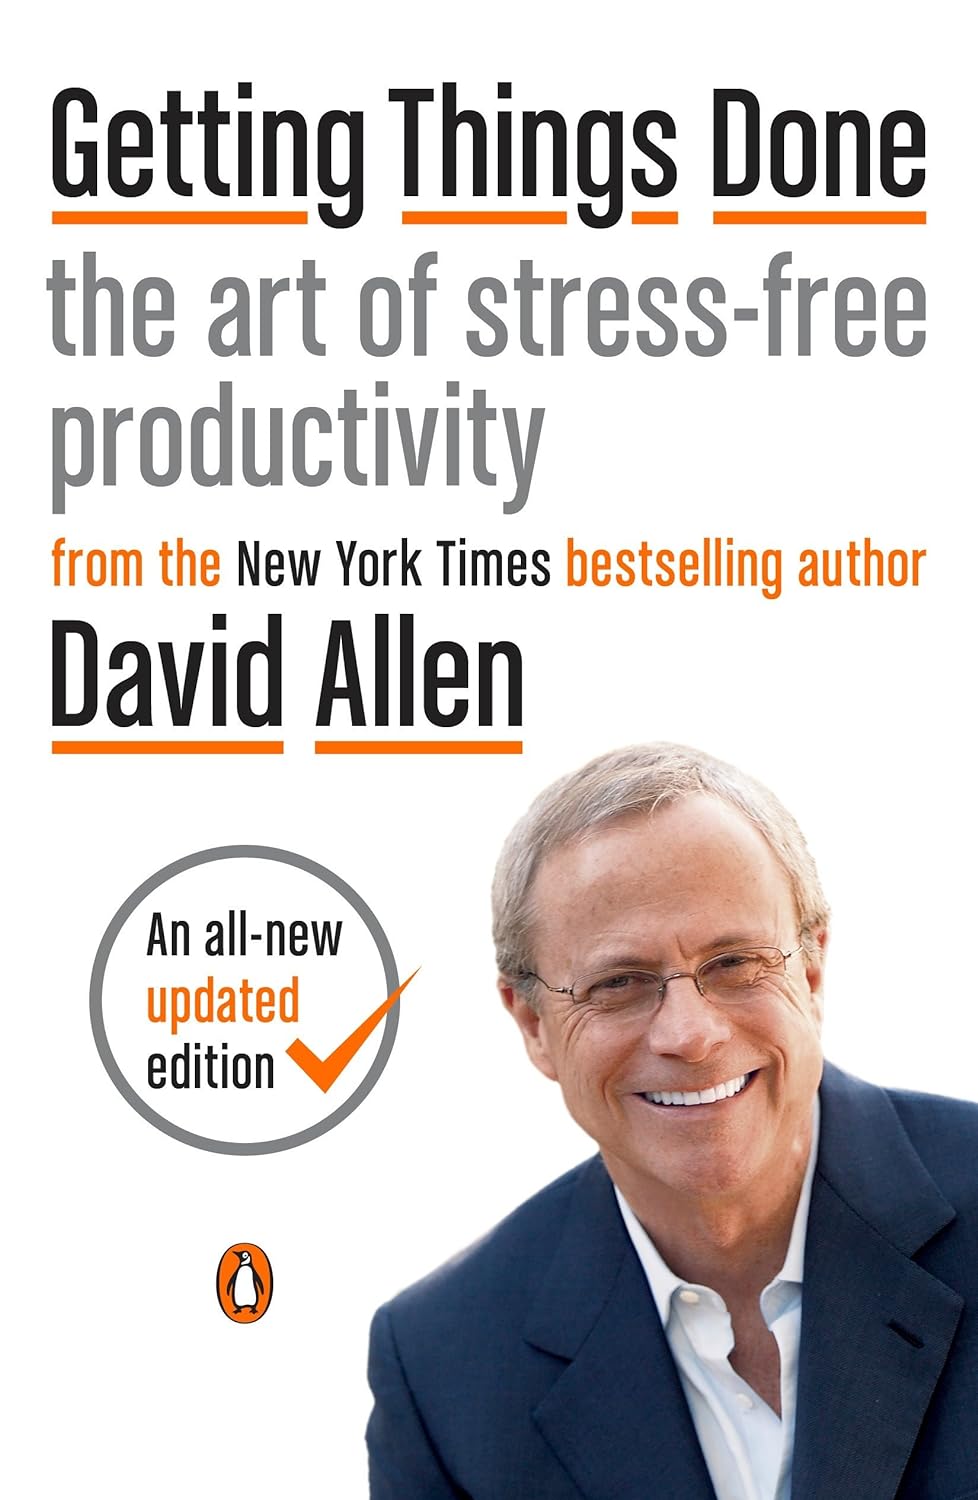 Affiliate link to the book Getting Things Done: The Art of Stress-Free Productivity by David Allen